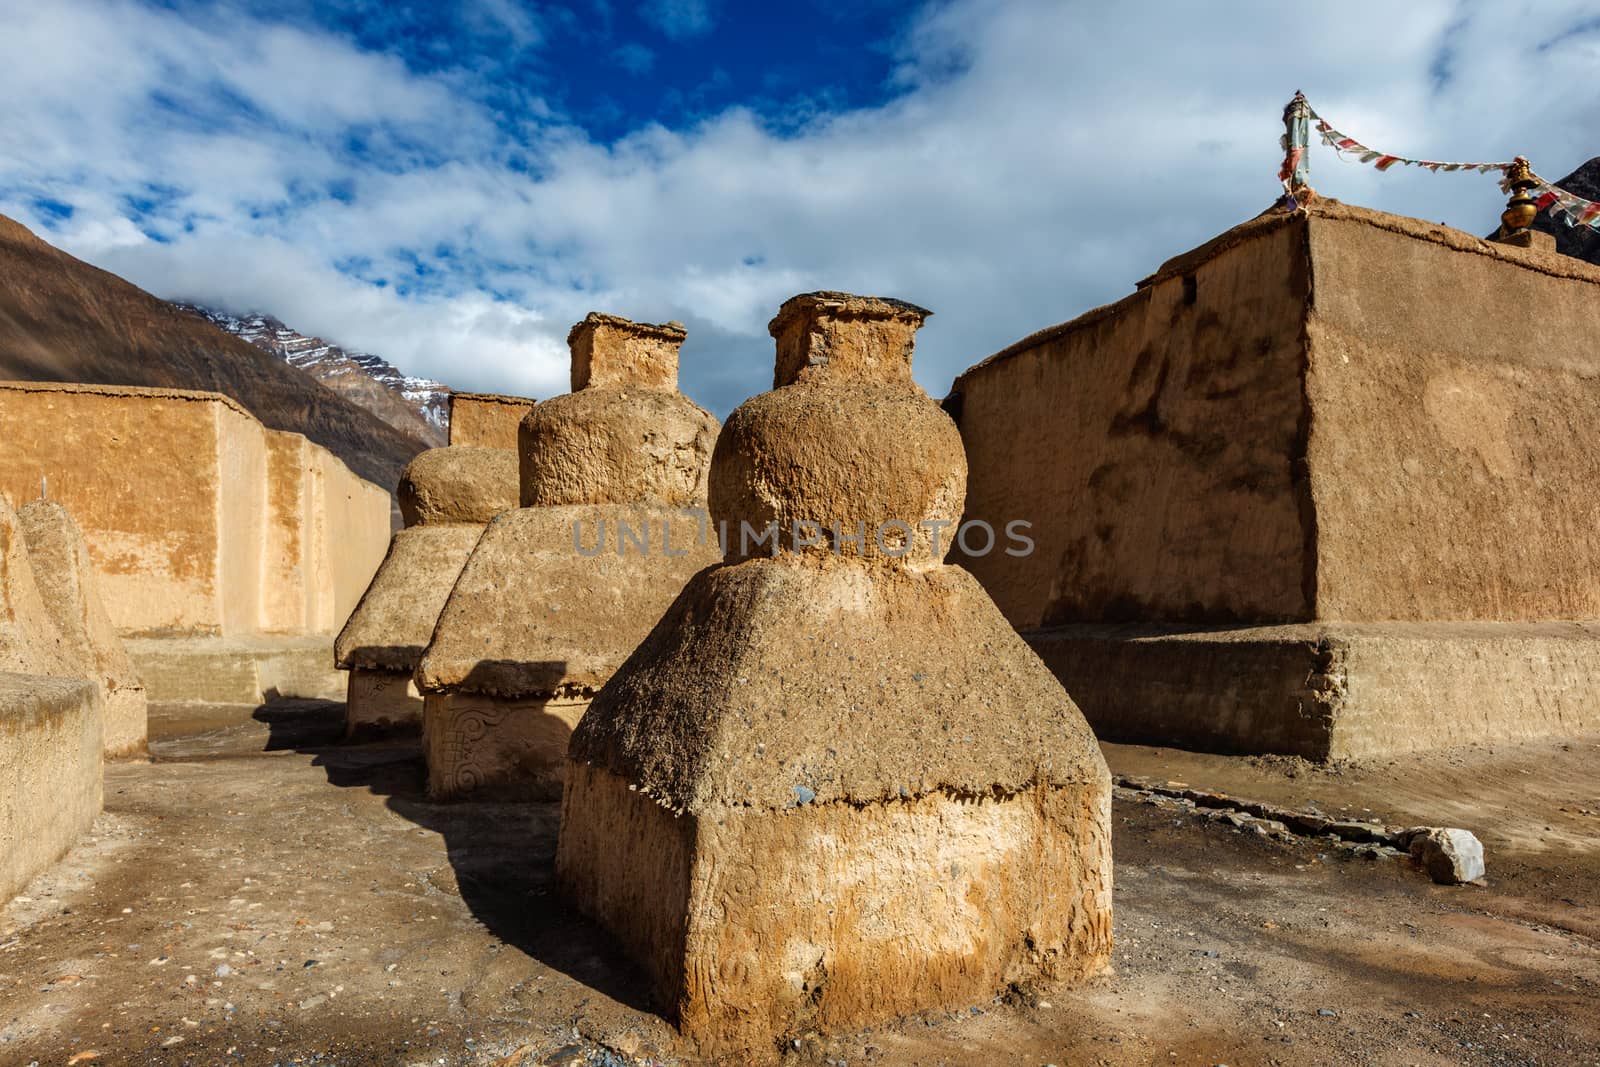 Buddhist gompas temple made of clay in Tabo village Spiti Valley. Clay gompa is built high in Himalaya on territory of monastery in tradition of Tibetan Buddhism religion. Himachal Pradesh, India